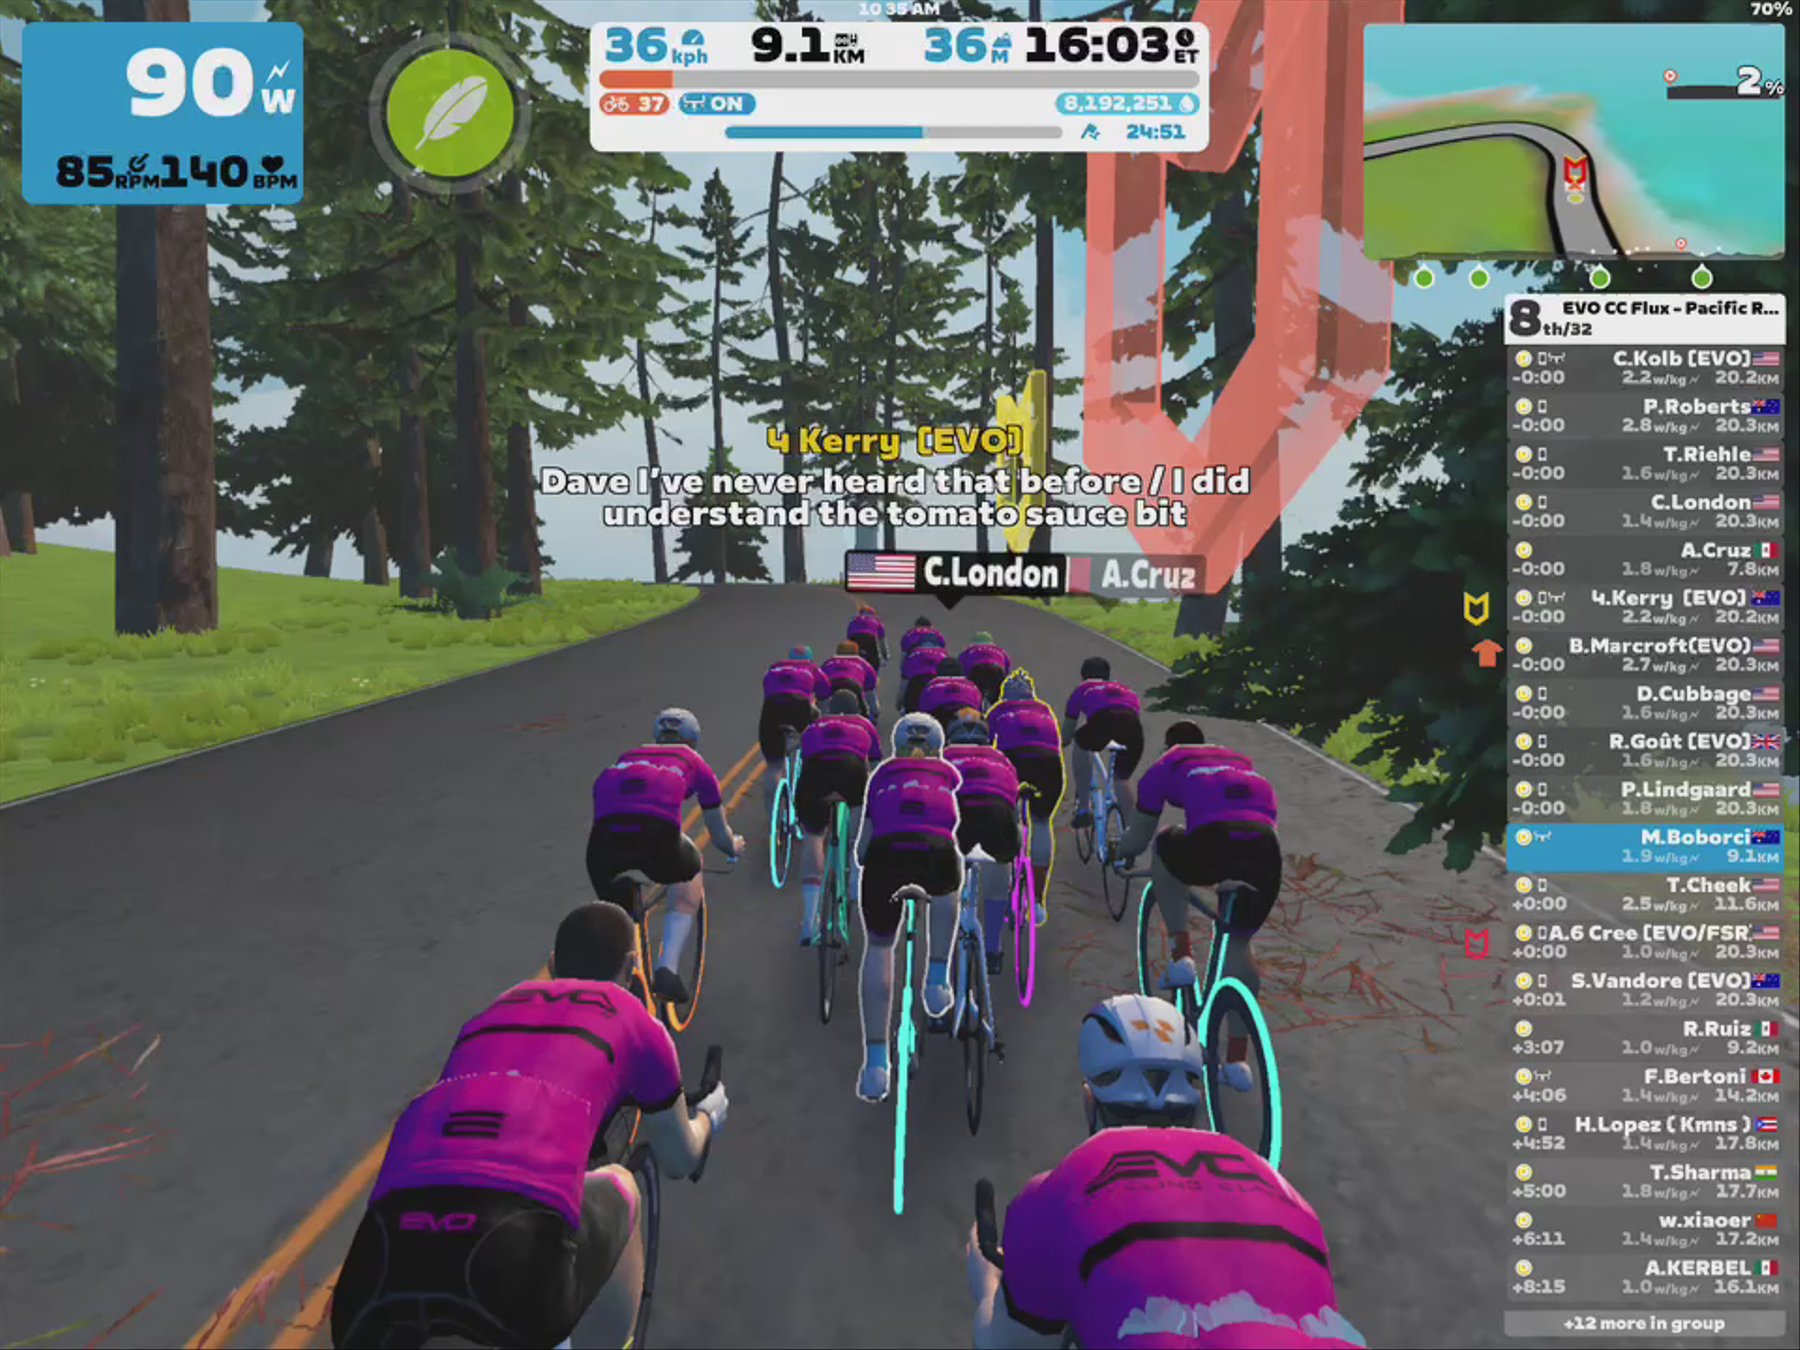 Zwift - Group Ride: EVO CC Flux - Pacific Ride [1.8 - 2.0w/kg avg] (D) on Coast Crusher in Watopia